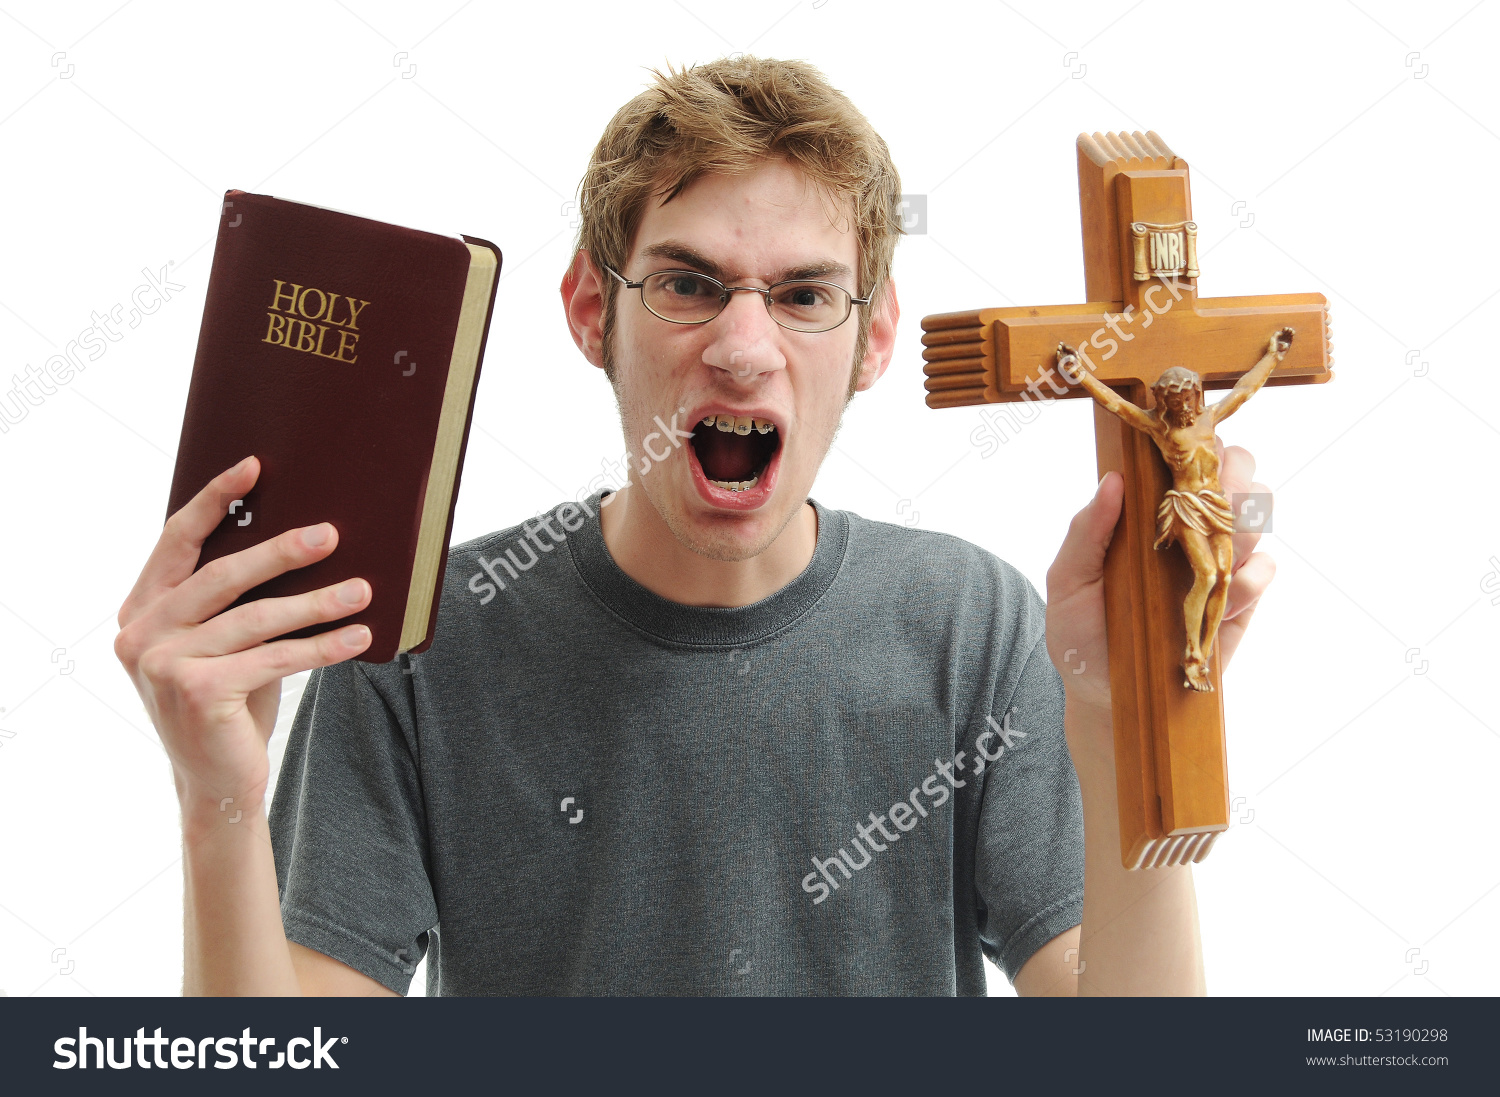 stock-photo-young-man-holds-up-a-wooden-crucifix-cross-and-a-red-leather-bible-while-yelling-in-anger-isolated-53190298